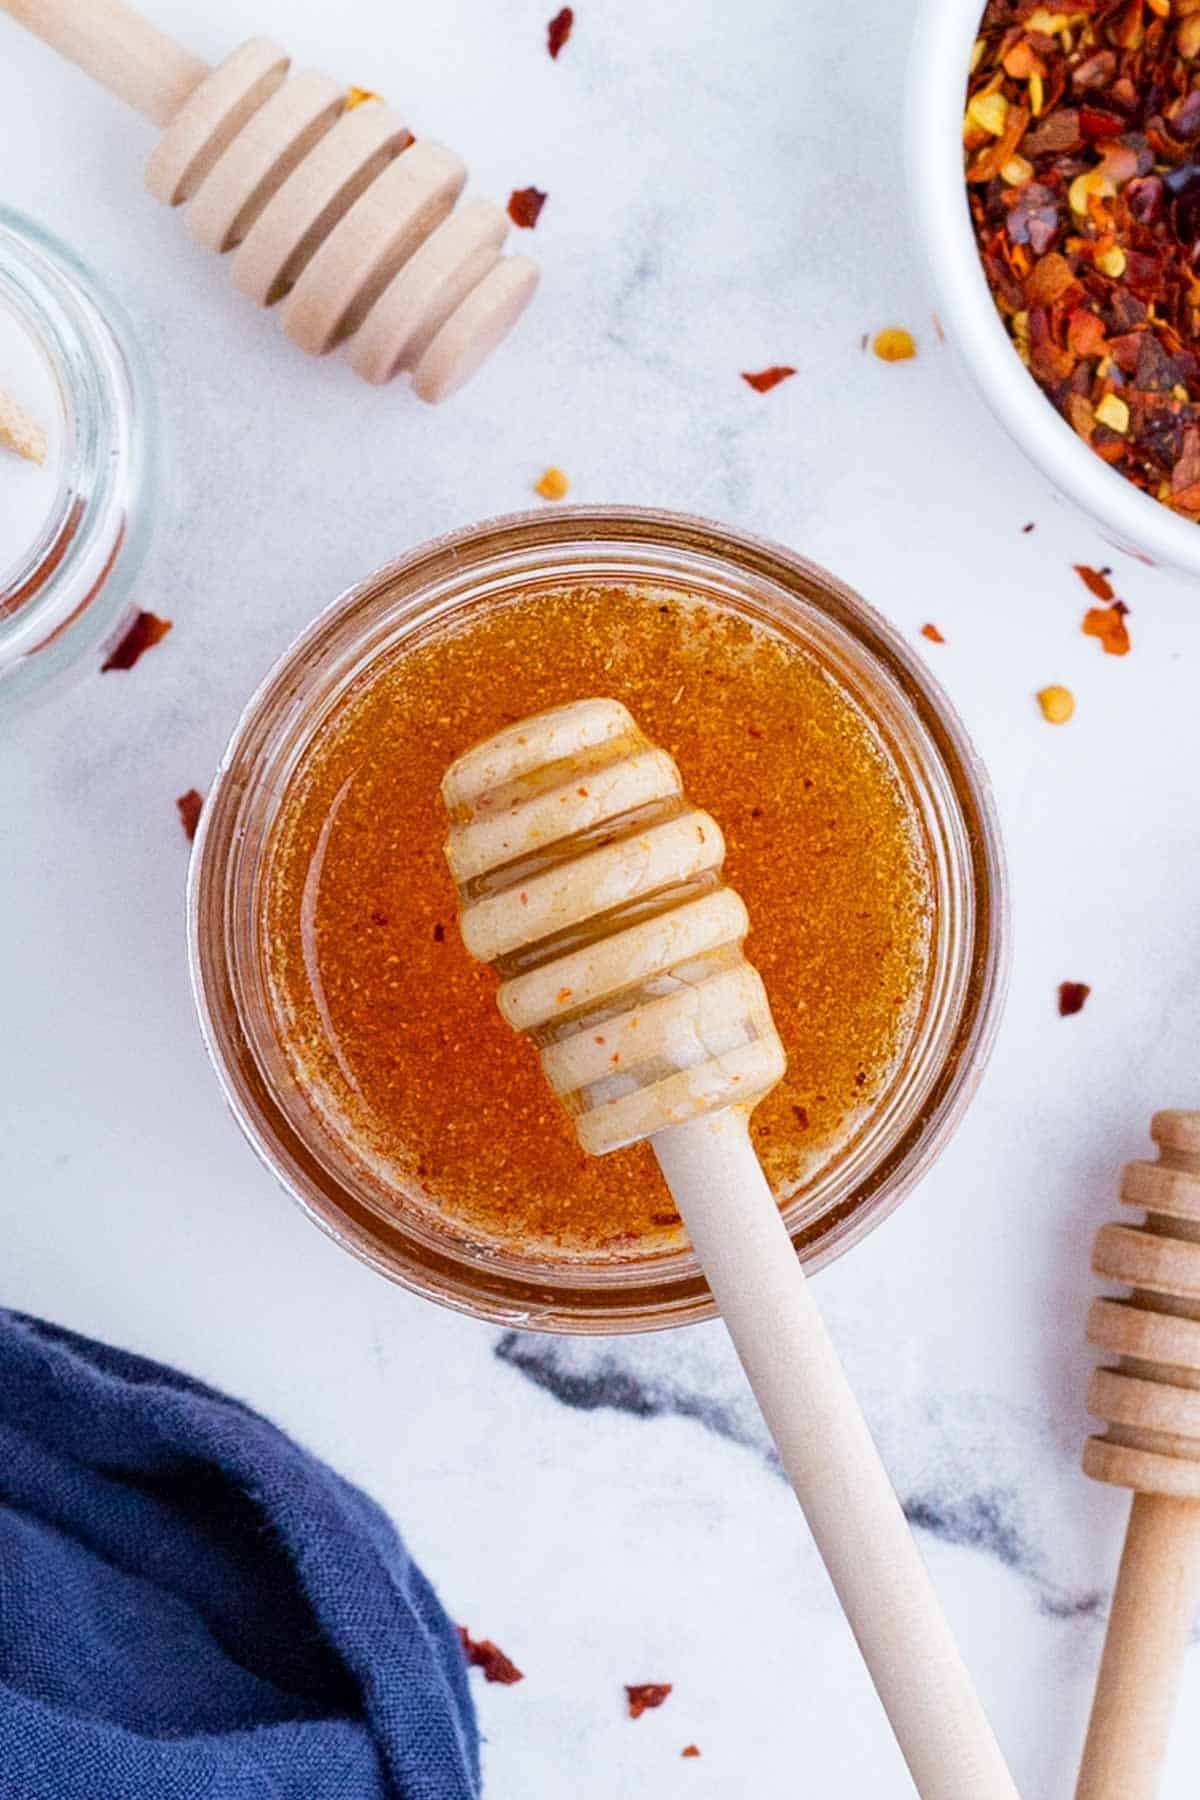 Hot honey is sweet and spicy and the perfect condiment. It can be stored in a glass jar for years.